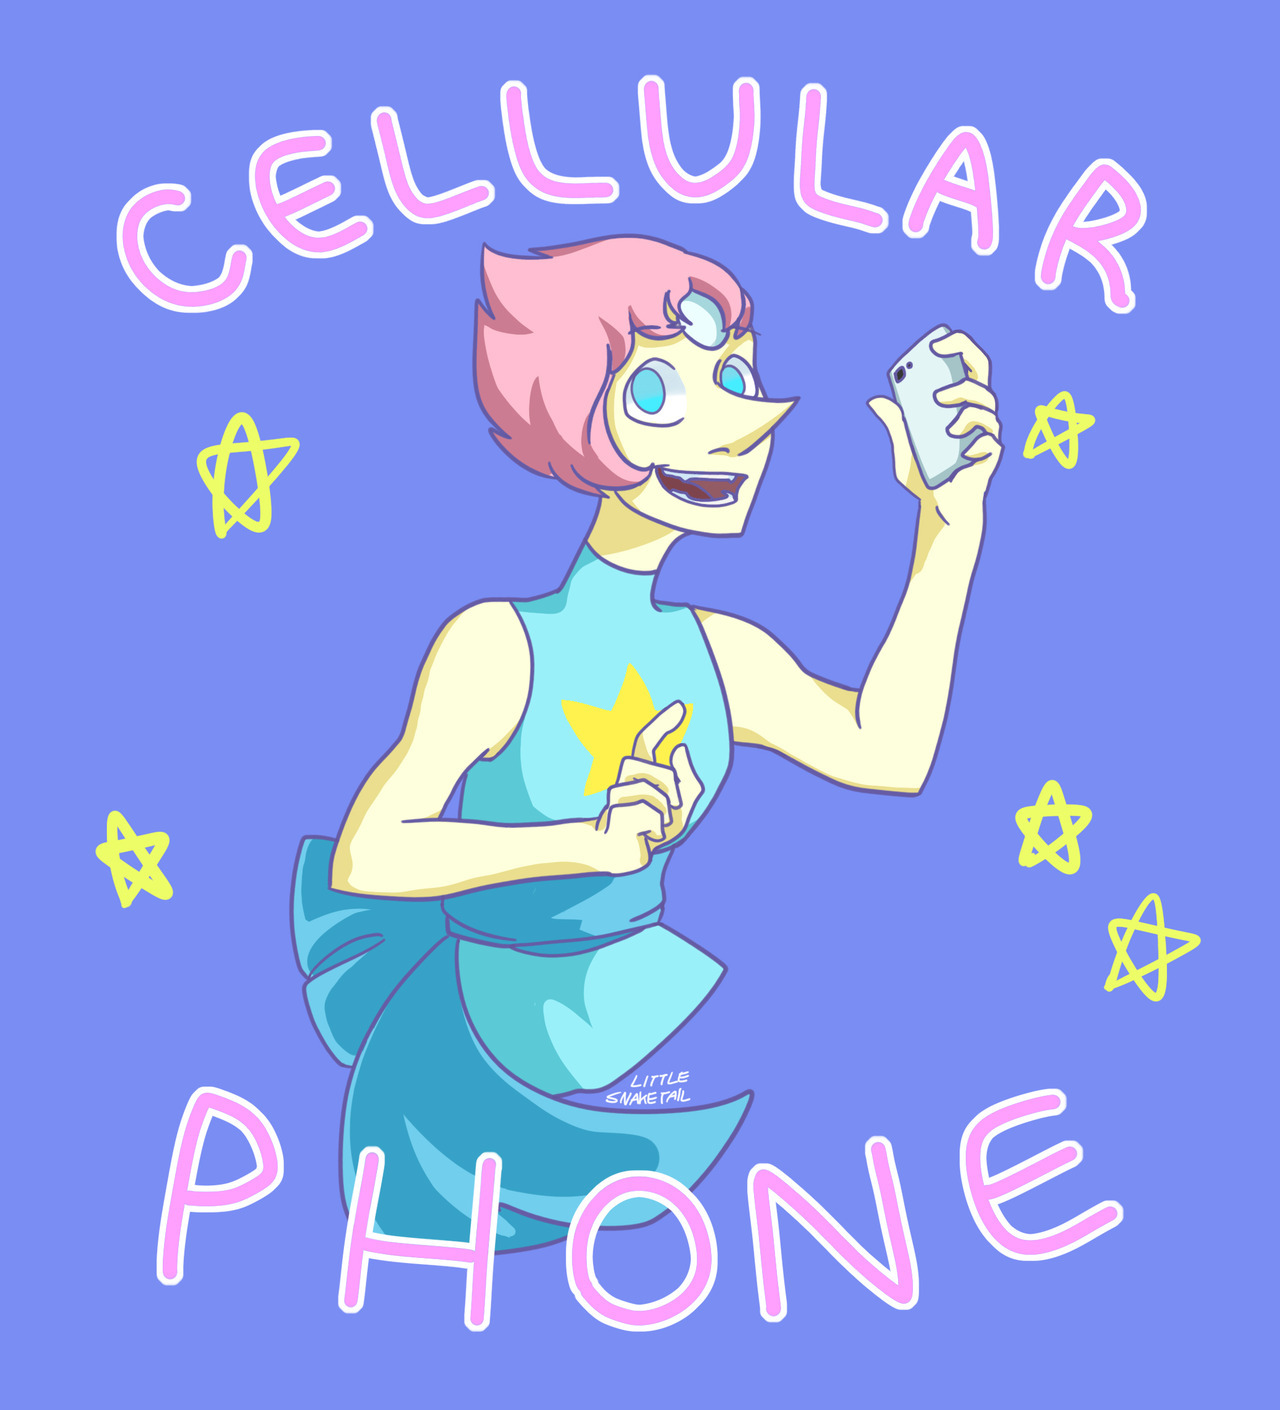 Pearl’s been a little behind on human technology (This kind of looks like she’s advertising the phone. Wasn’t intended.) Steven Universe © Rebecca Sugar